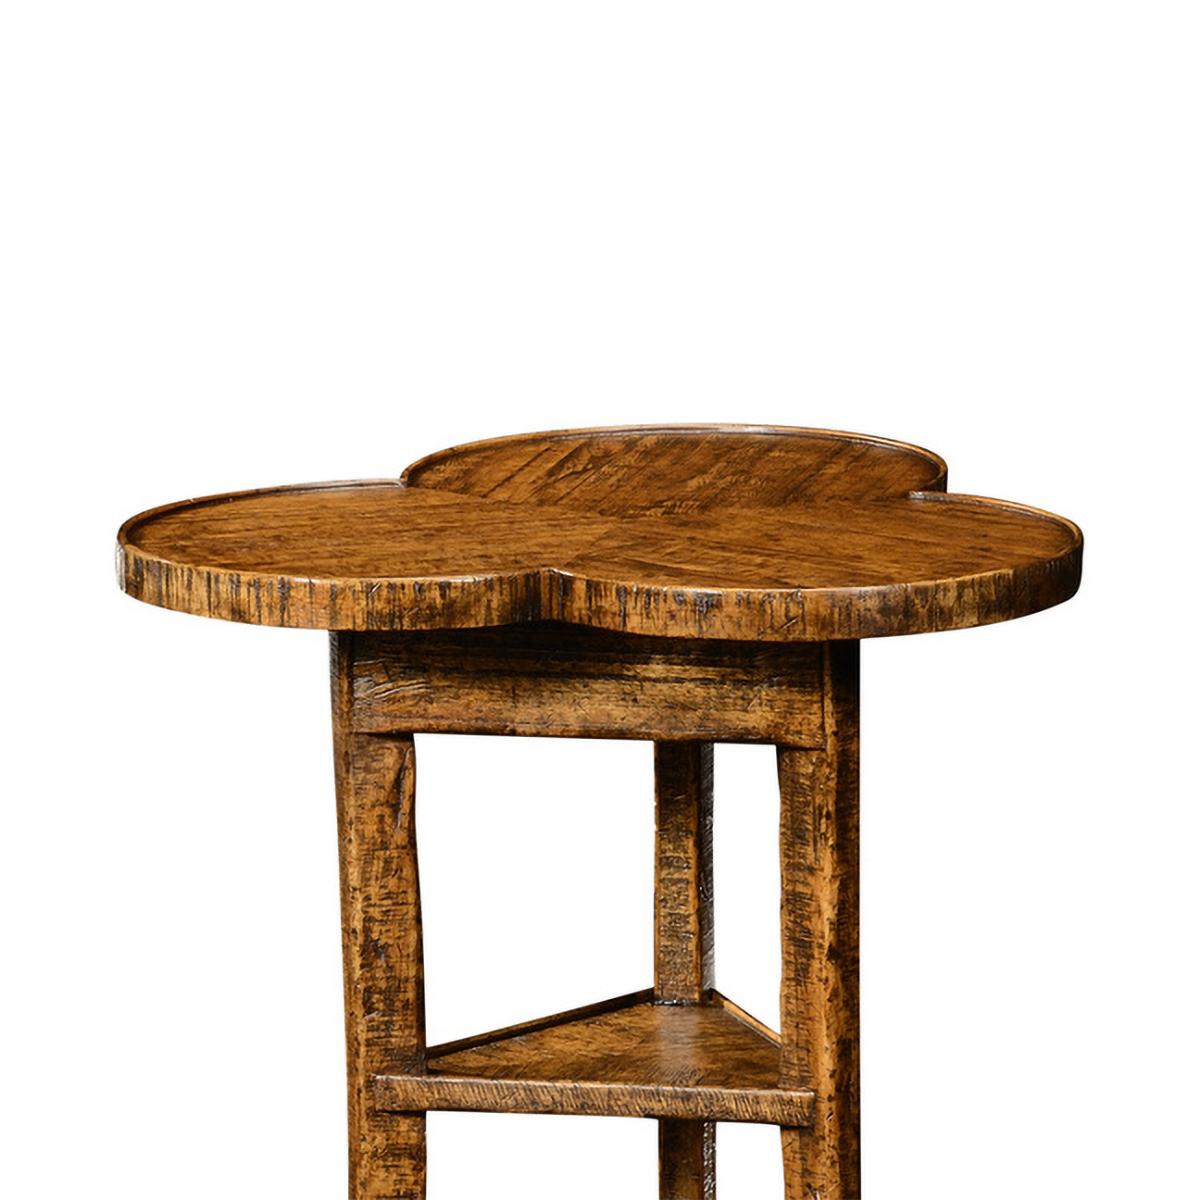 Trefoil Three-Tier Side Table - Country Walnut In New Condition For Sale In Westwood, NJ